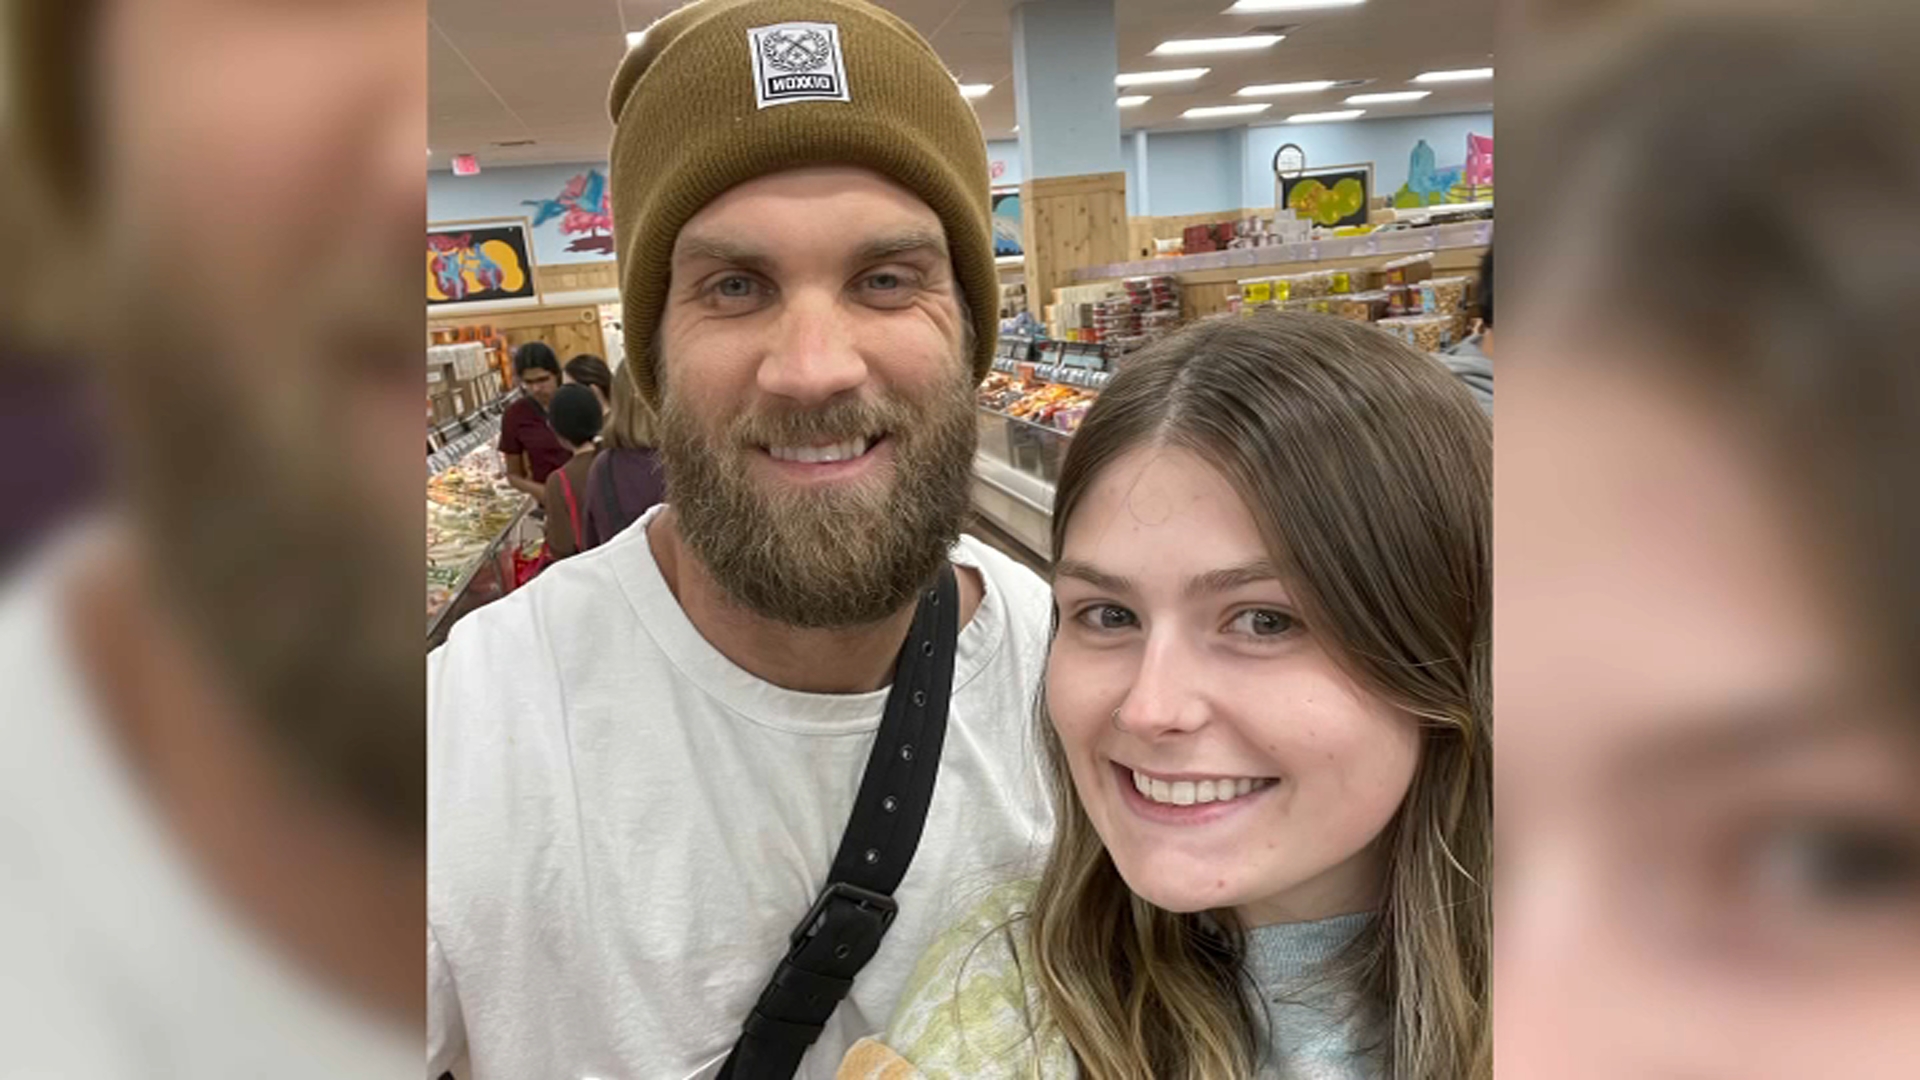 Eagles Everything on Instagram: Bryce Harper pulled up to the